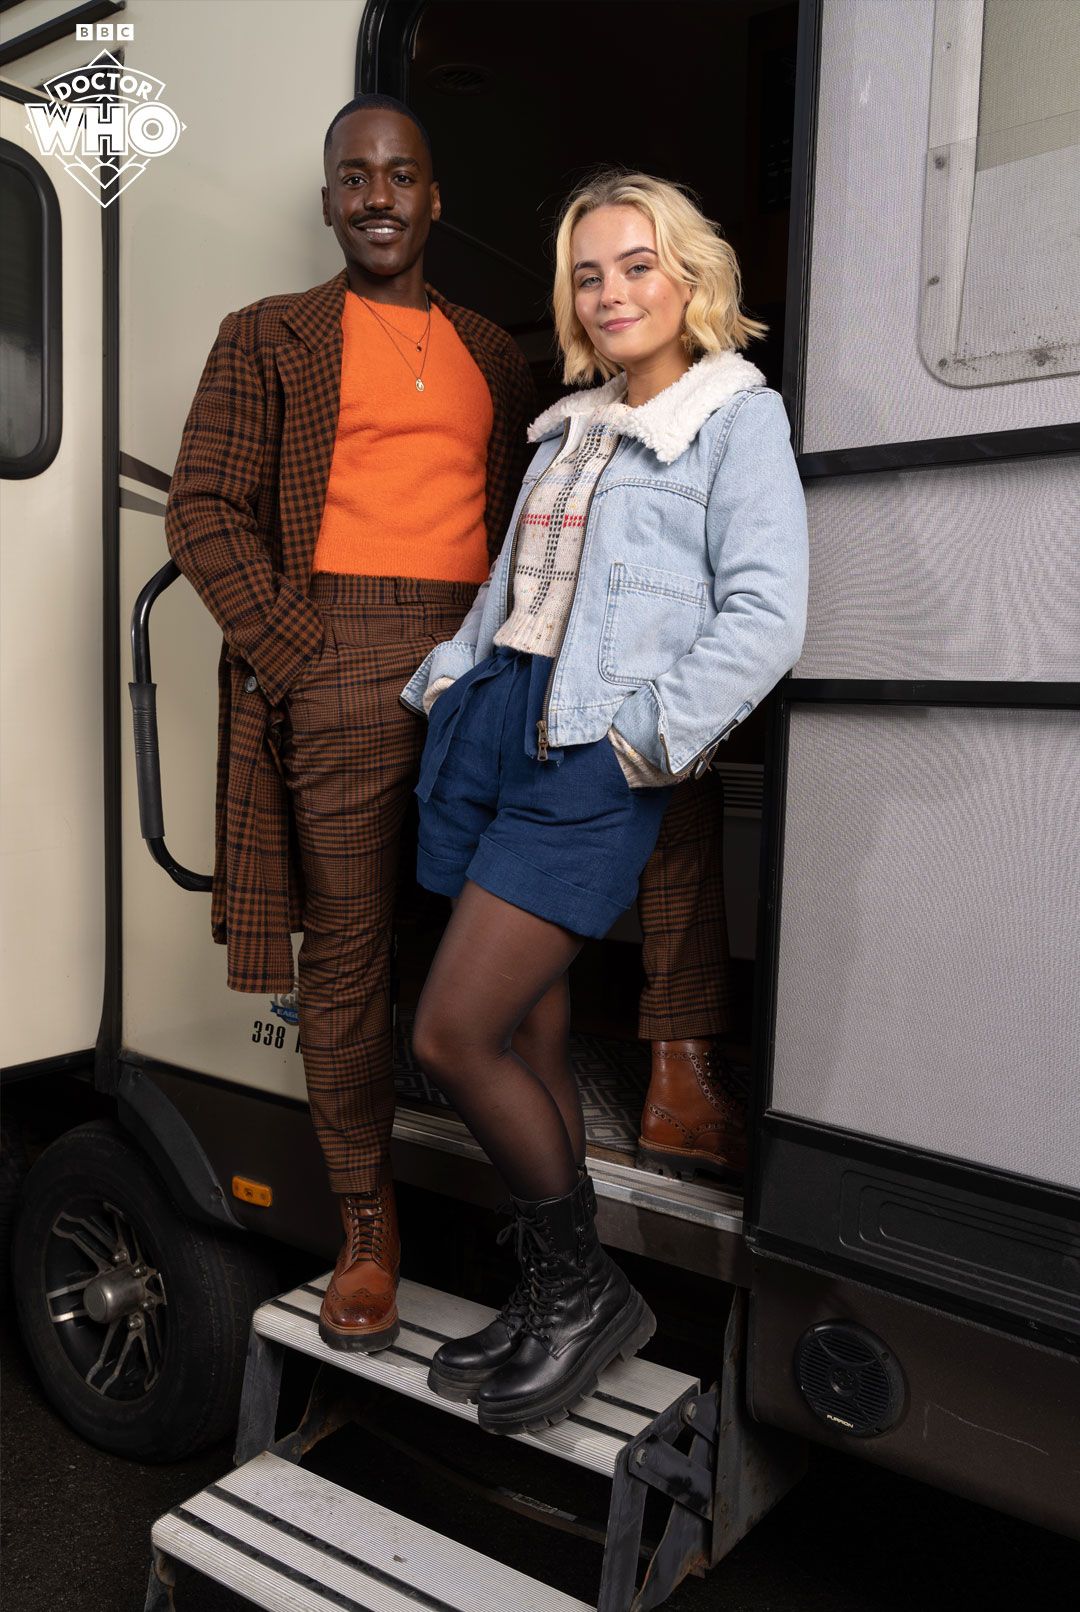 Ncuti Gatwa and Millie Gibson as the Doctor and Ruby Sunday in Doctor Who